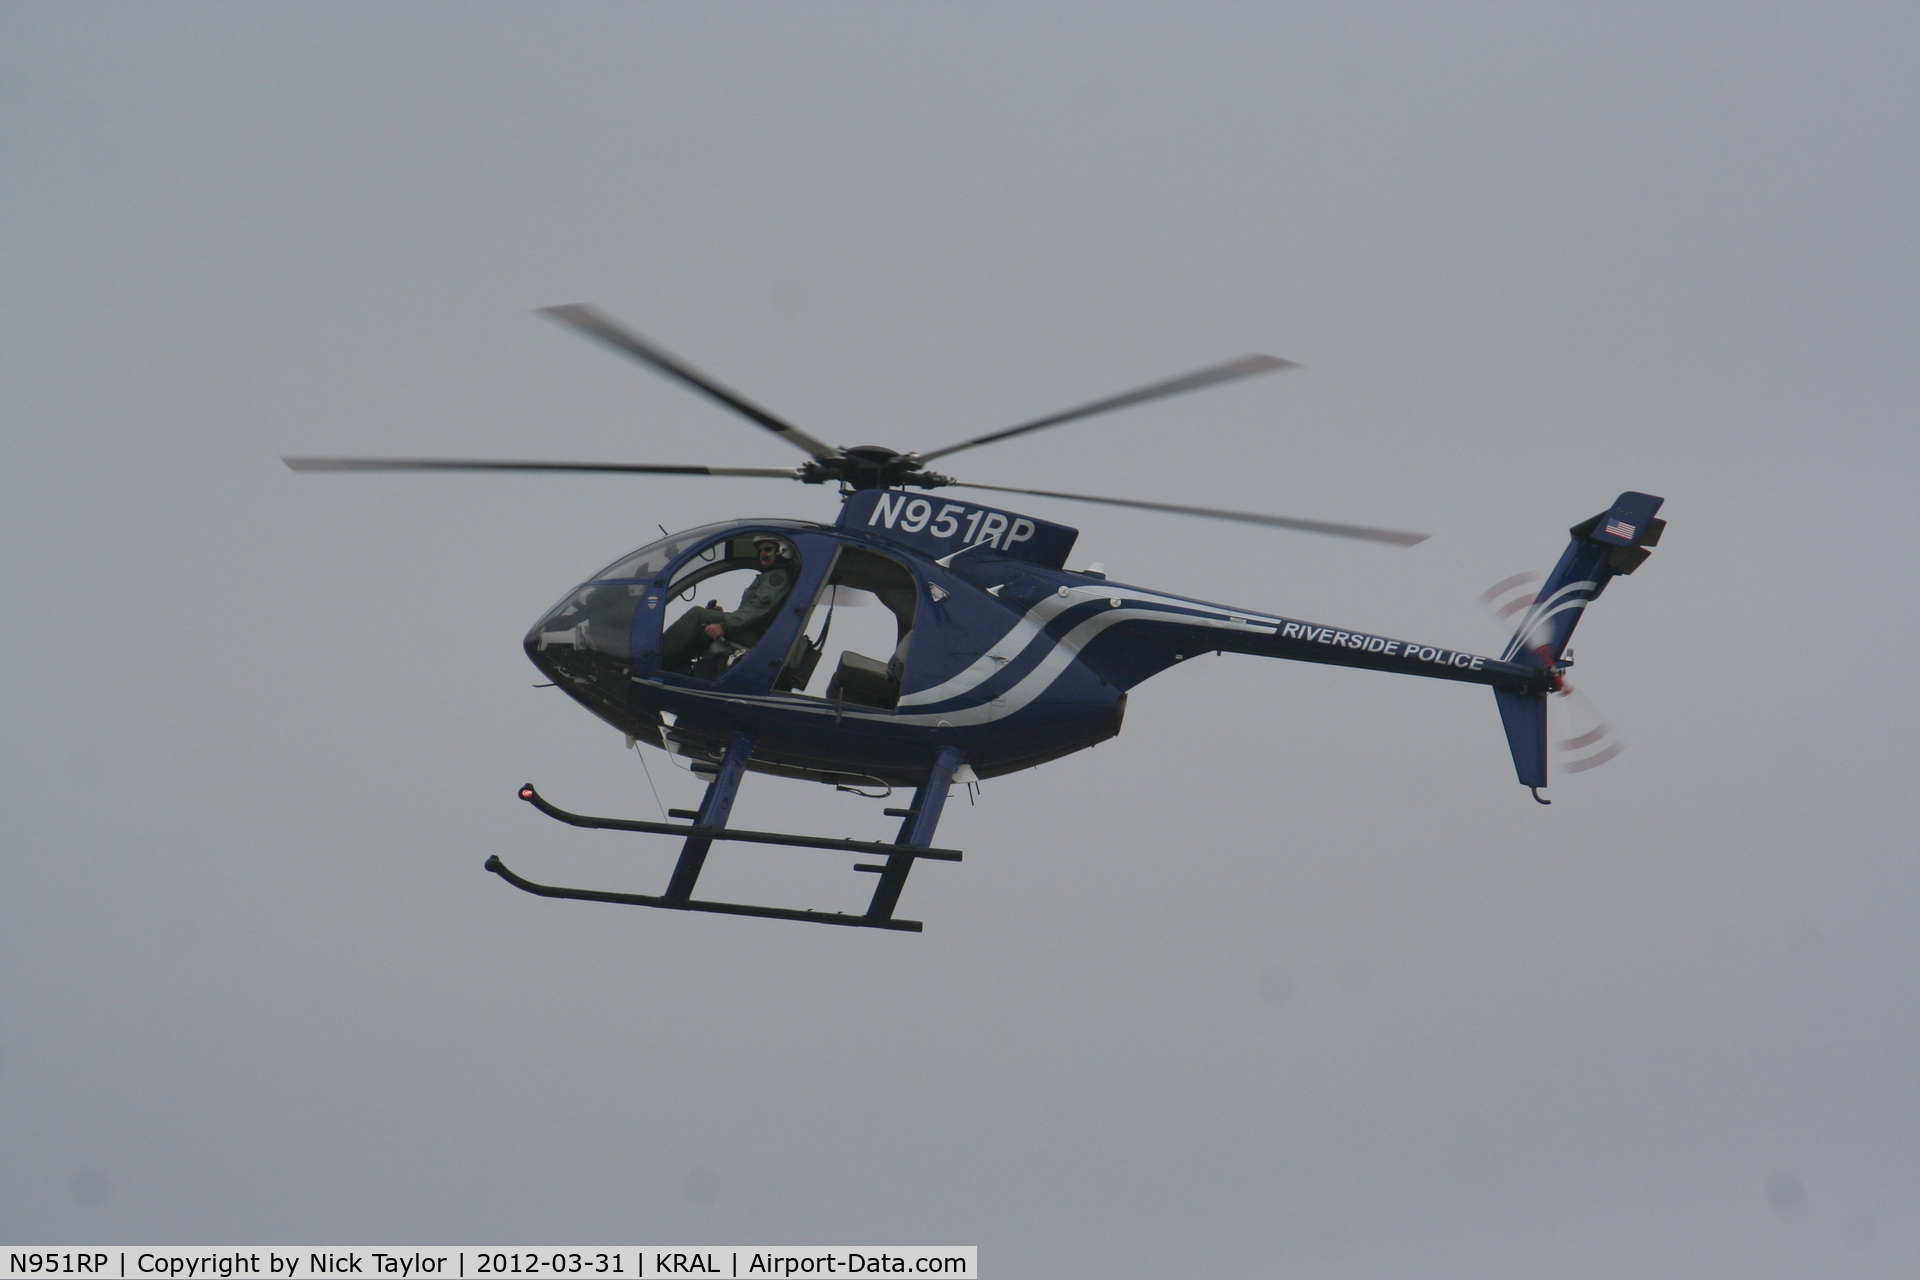 N951RP, 2008 MD Helicopters 369E C/N 0583E, Riverside Police